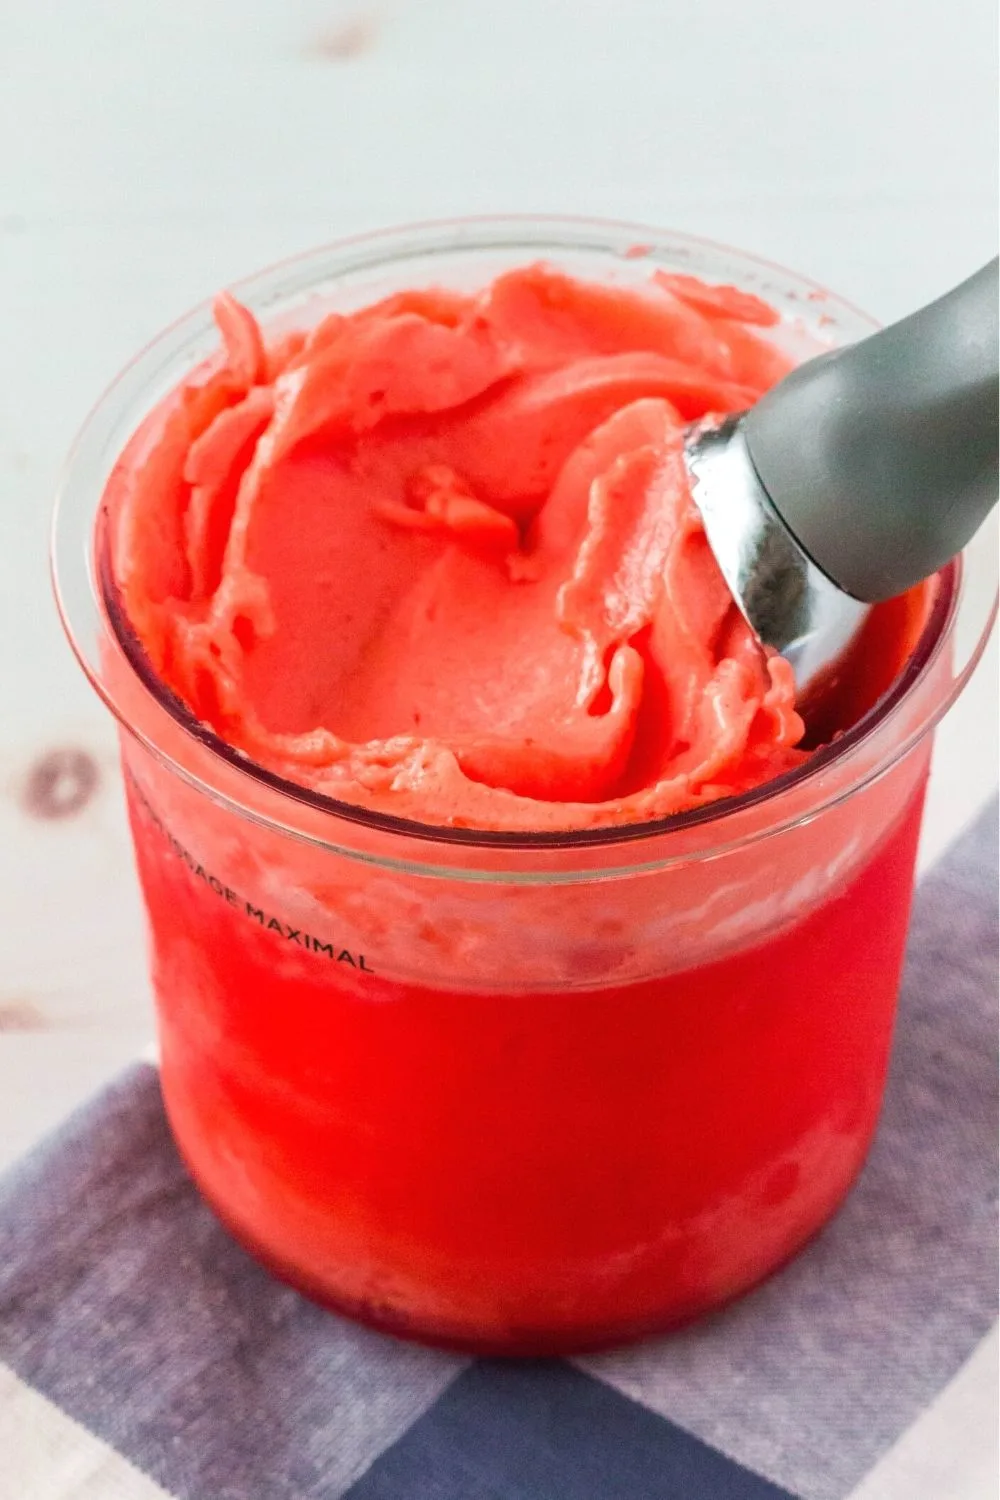 ninja creami strawberry sorbet made from gelatin, with an ice cream scoop in the sorbet